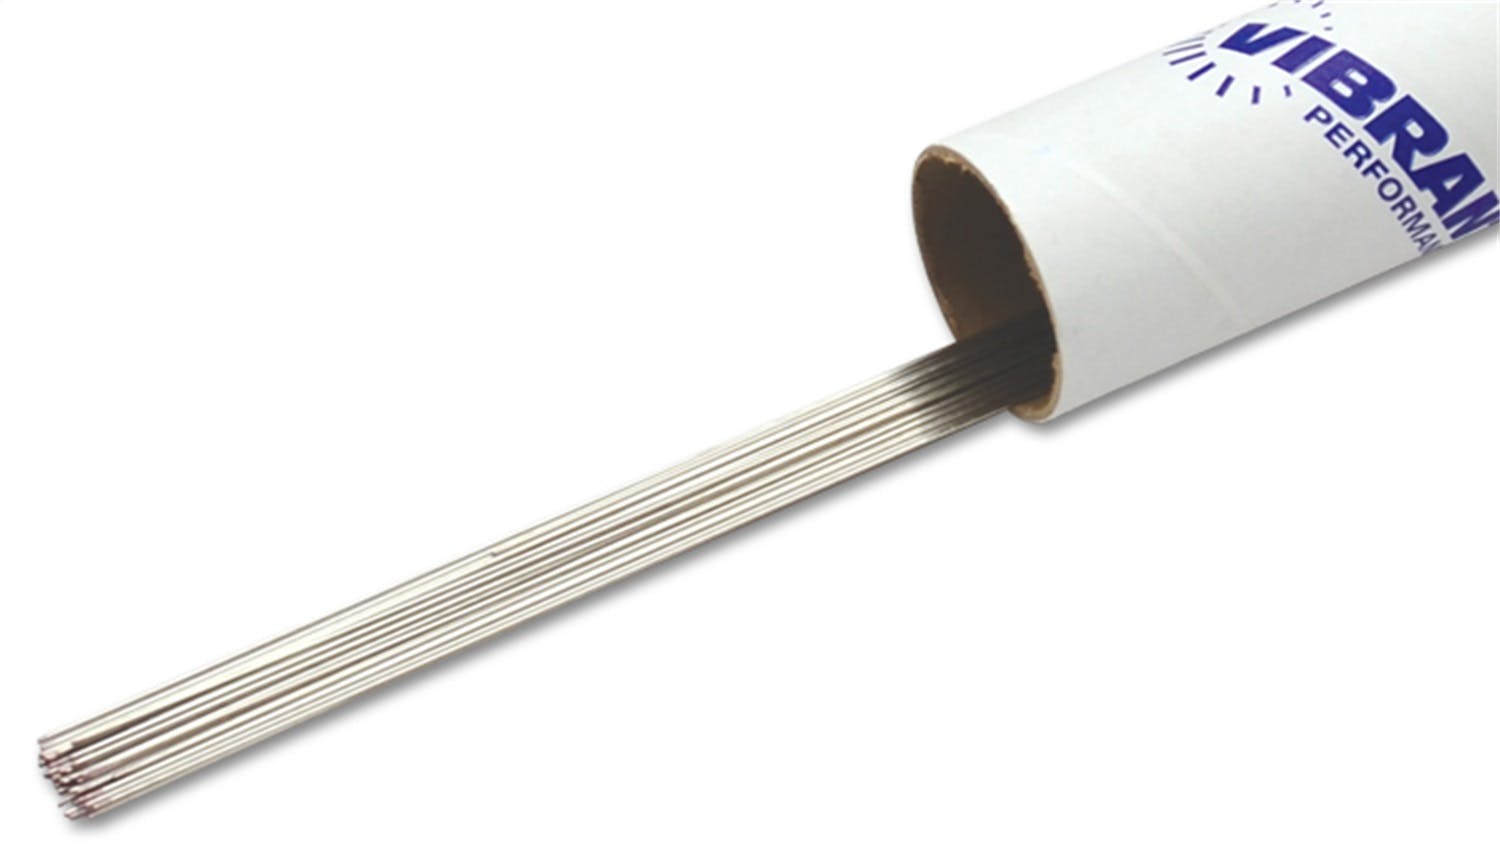 Vibrant Performance 29143 Wire Stainless Steel ER308L - 0.045 inch Thick (1.2mm) - 39.5 inch Long Rod - 3lb box